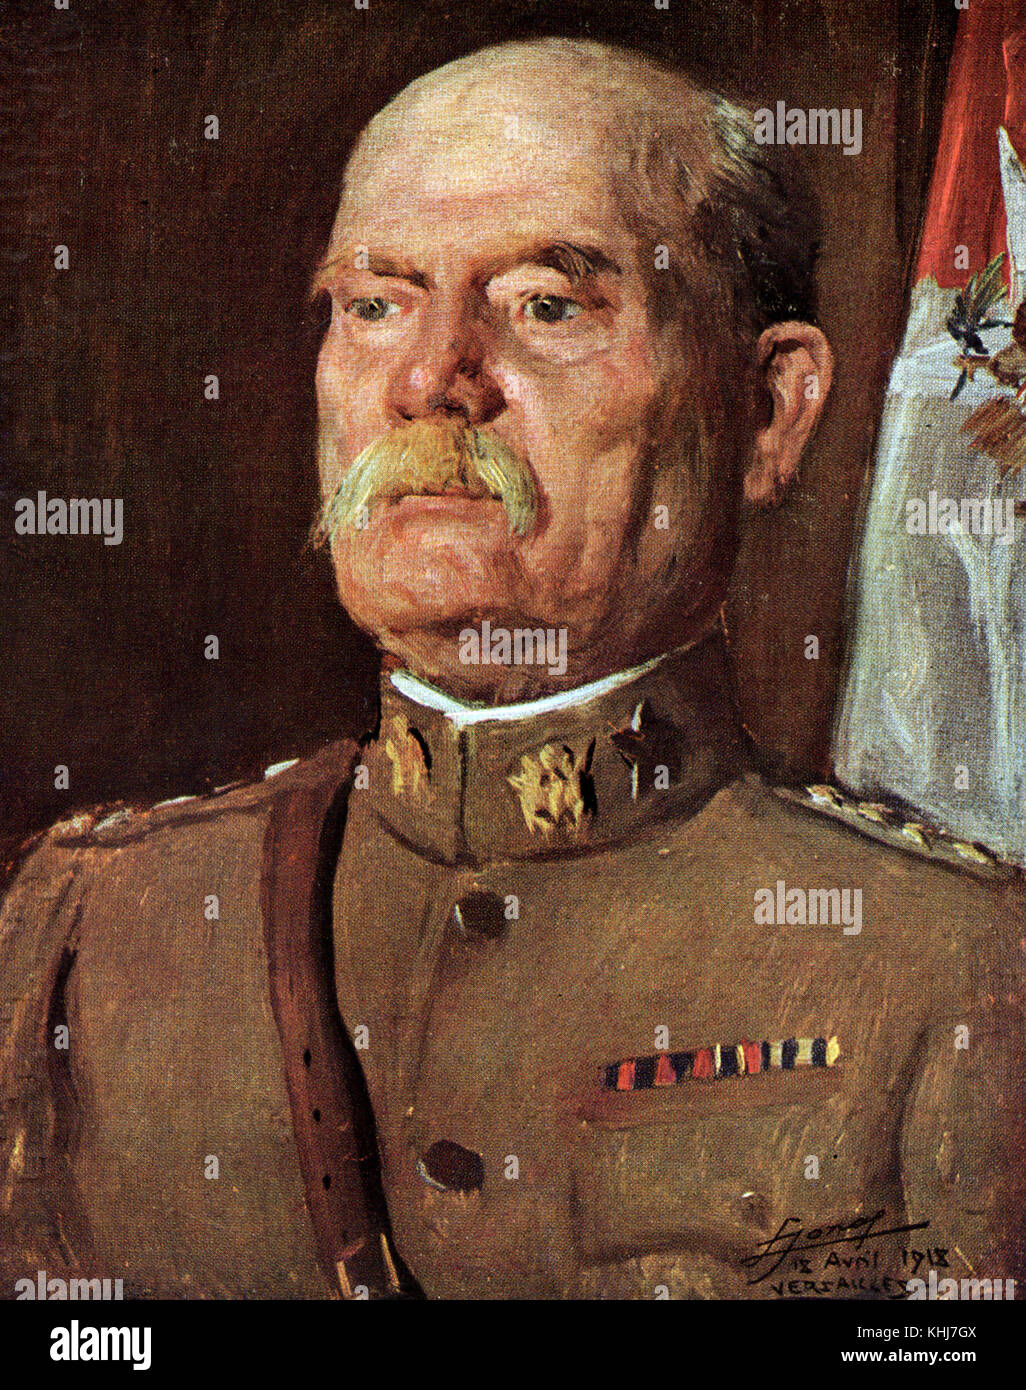 Portrait of General Tasker Howard Bliss  - American army officer Stock Photo